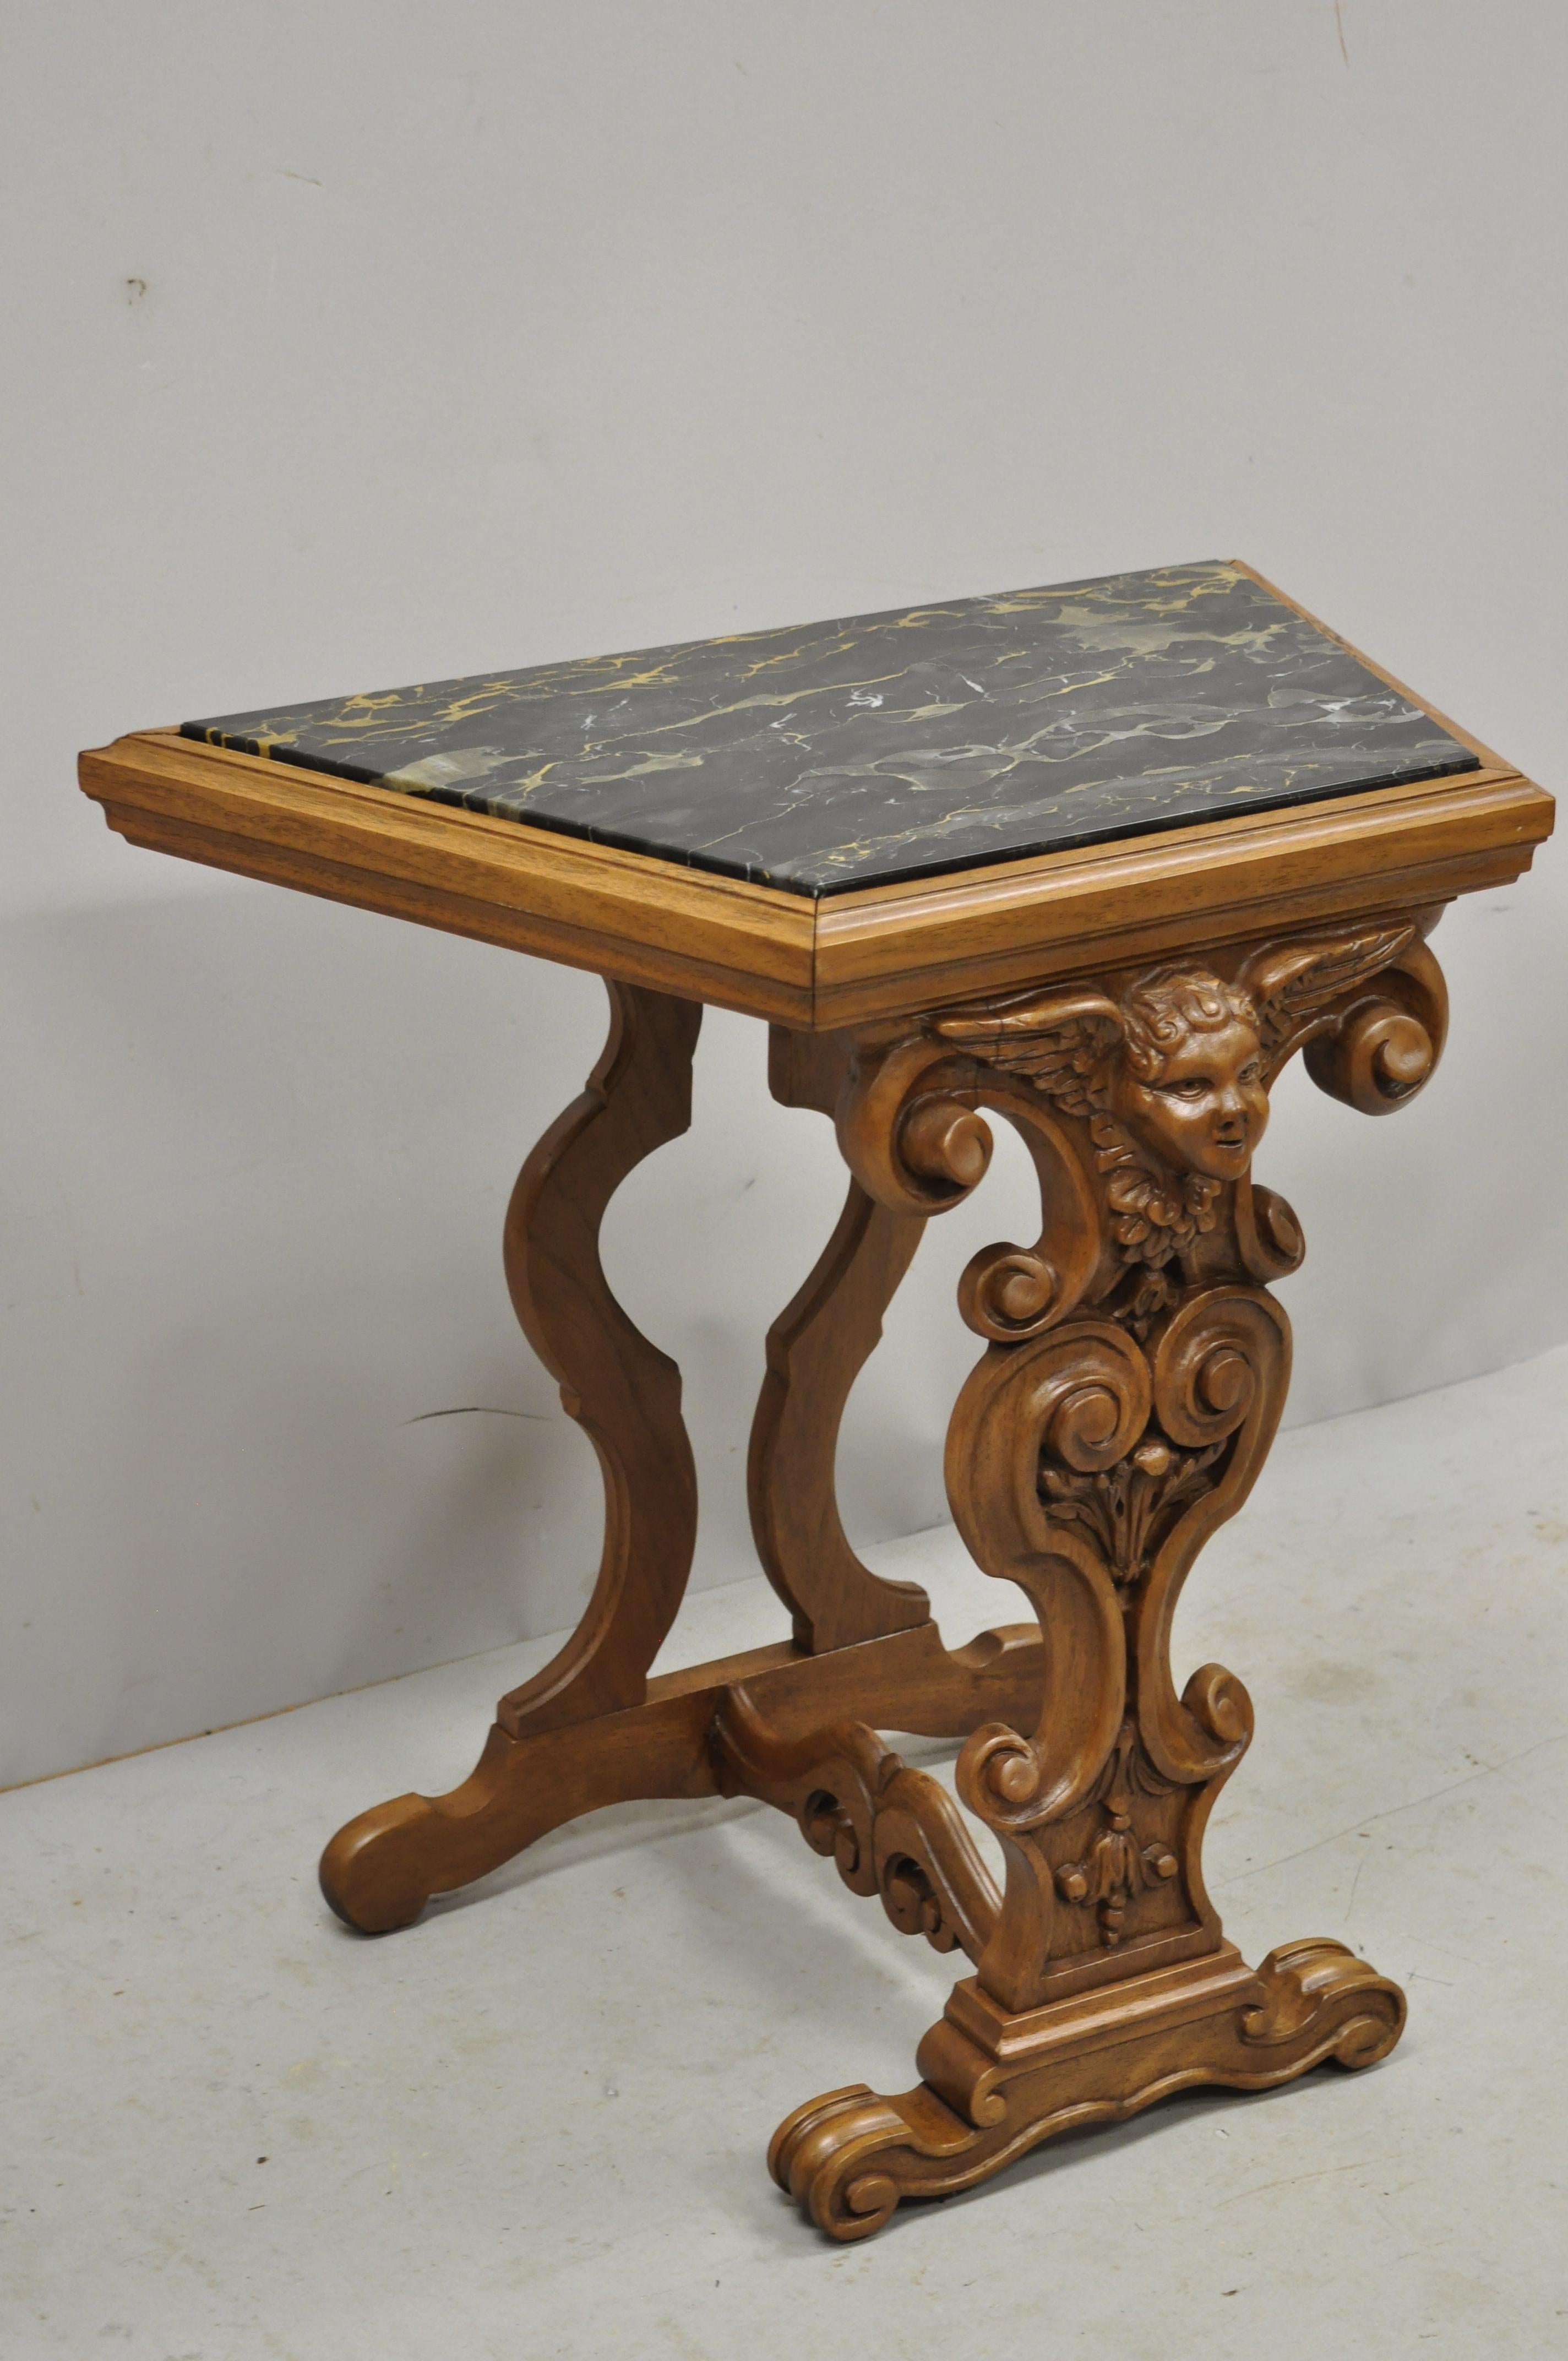 Antique Italian Renaissance figural carved marble top side table with winged cherub head. Listing includes an inset marble top, figural carved 3 dimensional winged cherub head, stretcher base, solid wood frame, very nice antique item, great style